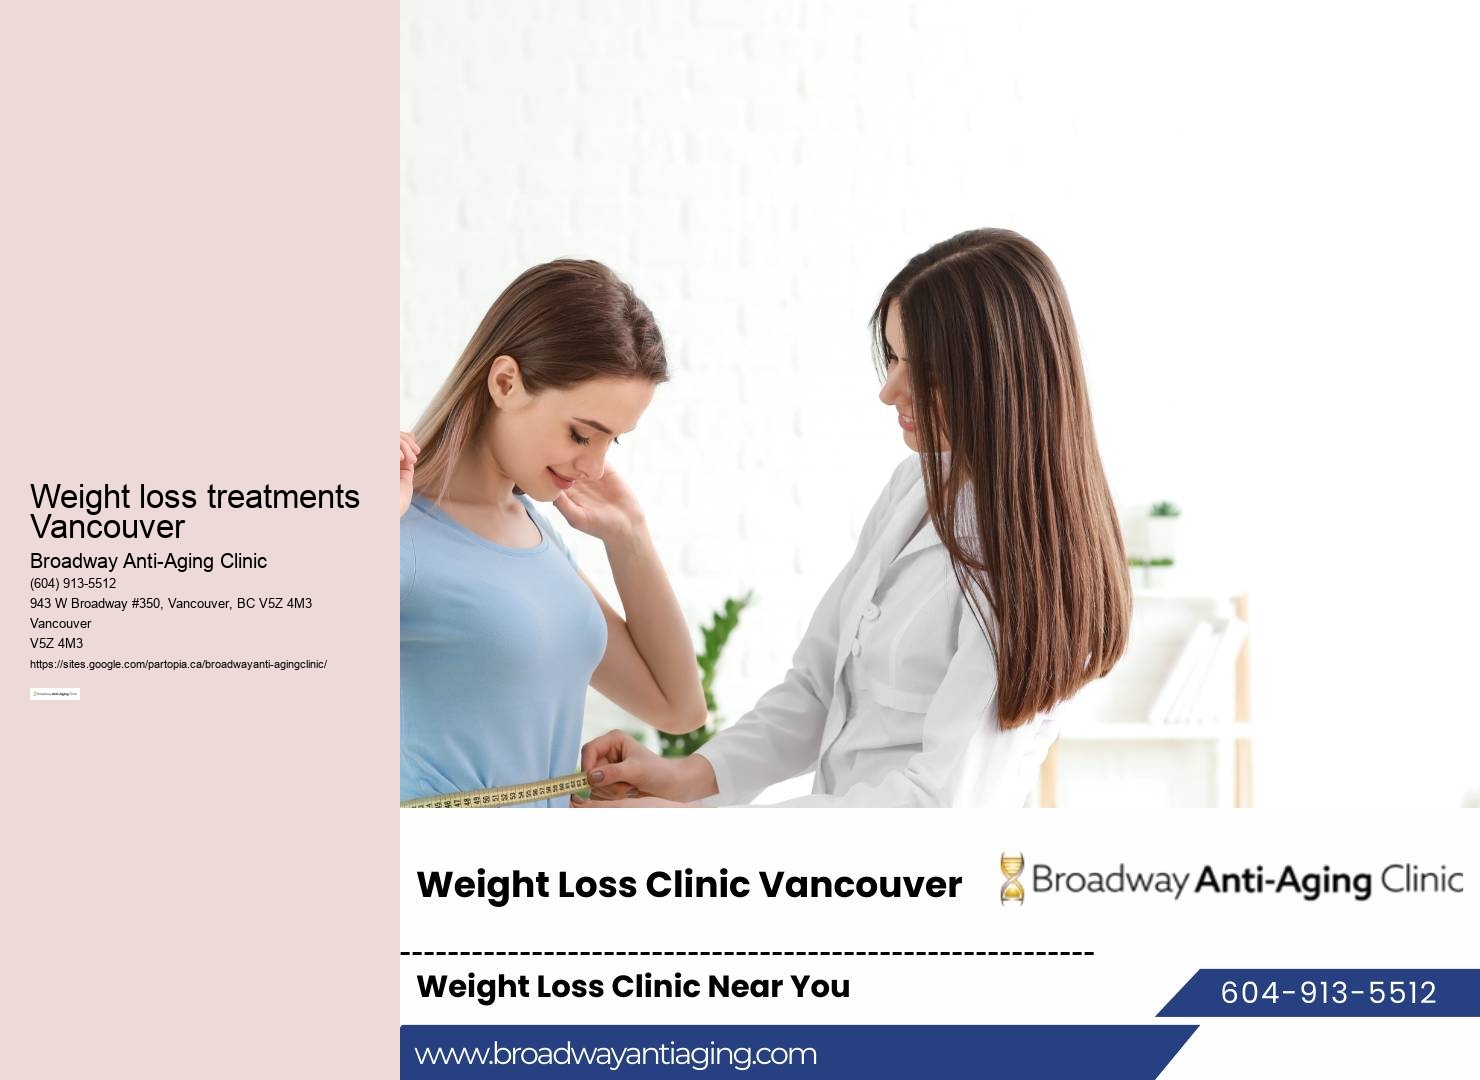 Weight loss treatments Vancouver